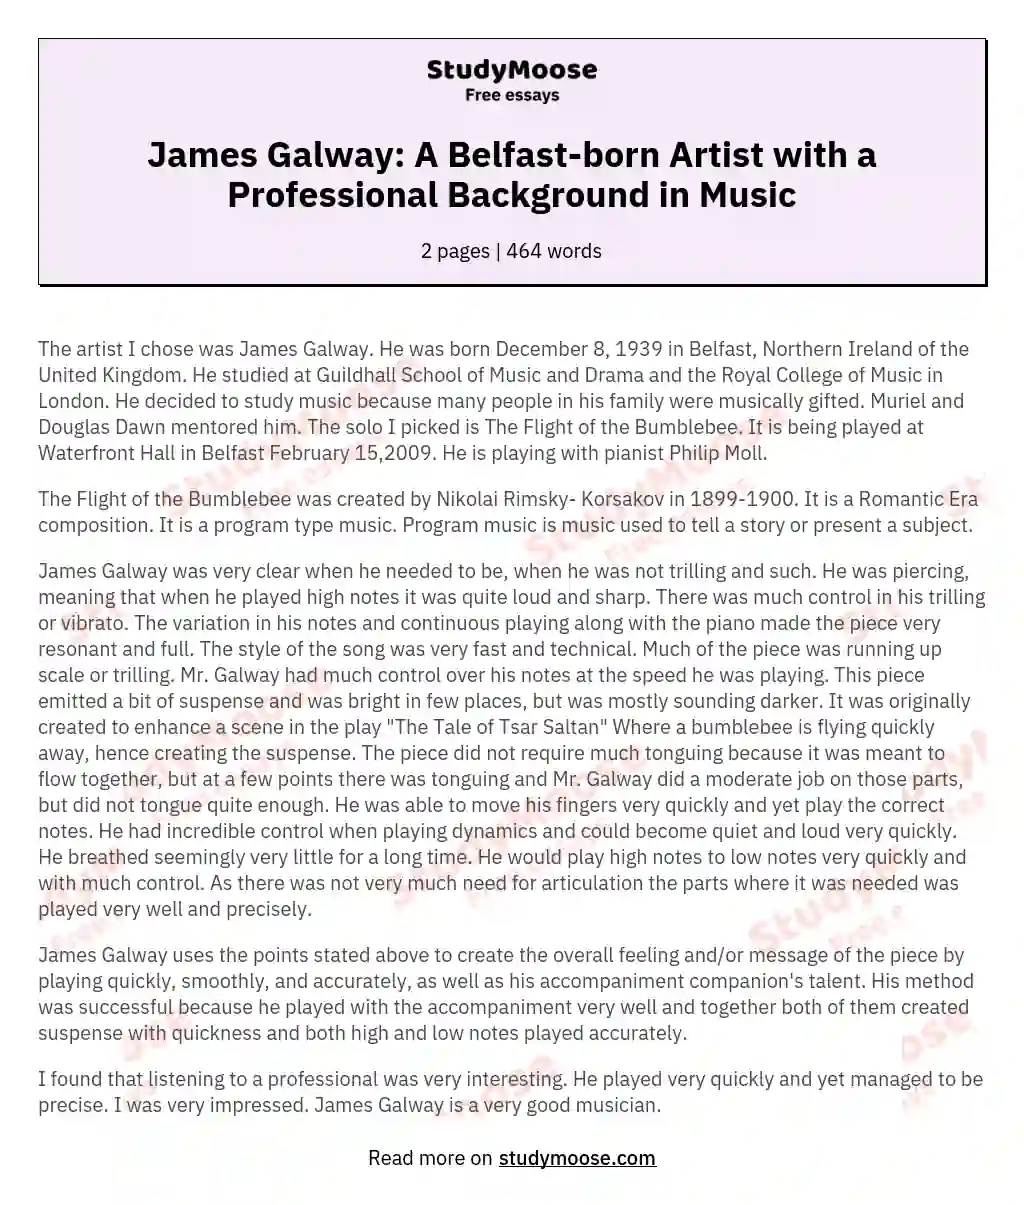 James Galway: A Belfast-born Artist with a Professional Background in Music essay